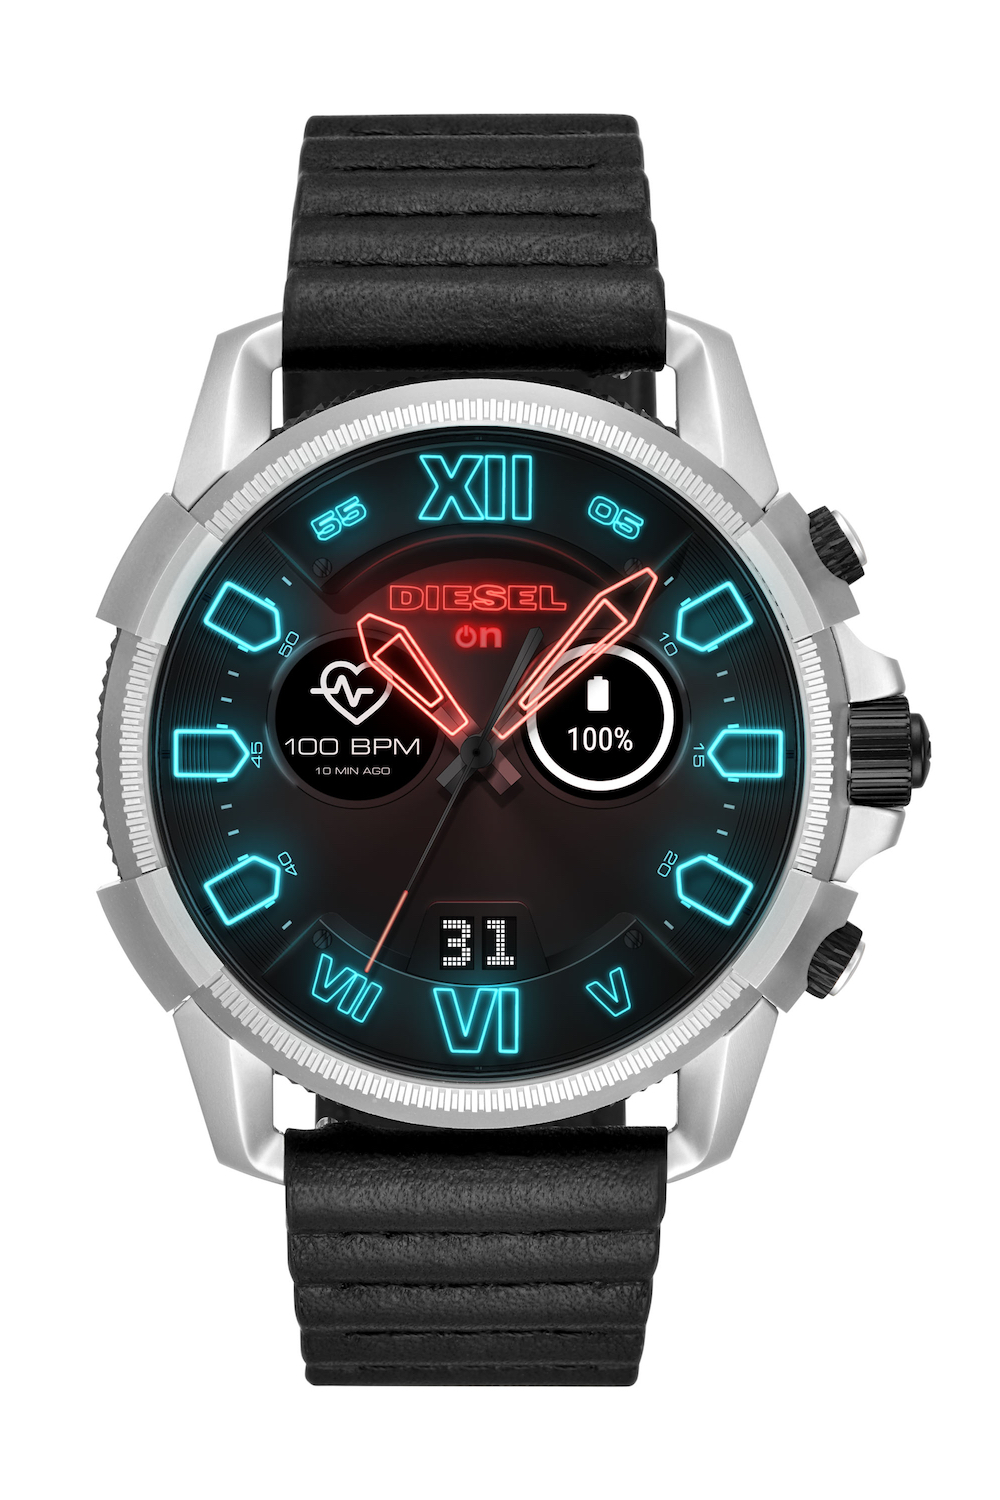 Forget Version 2.0: Diesel's New Watch Is So Advanced, It's 